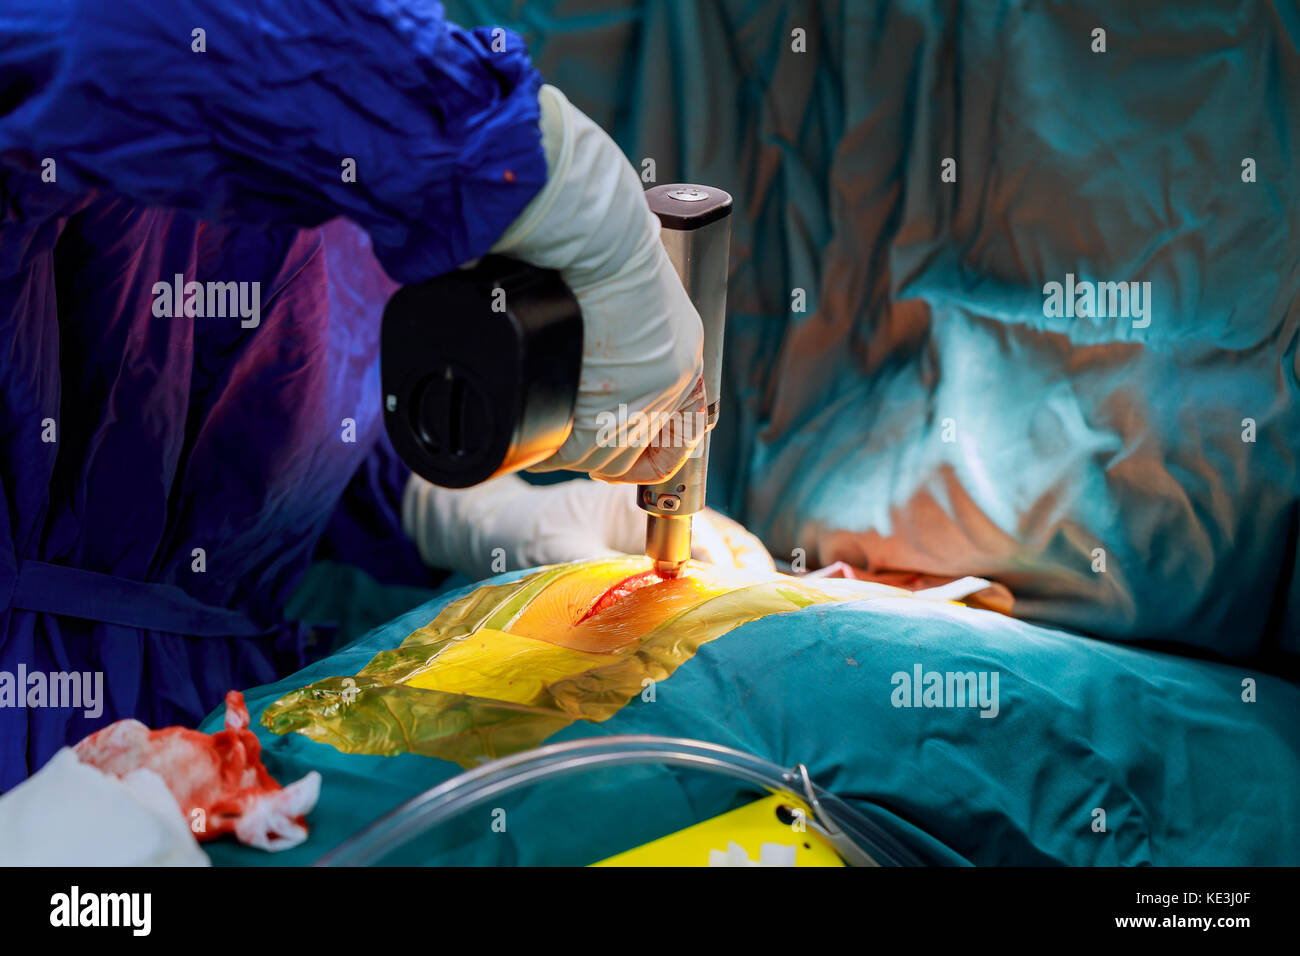 Cutting the chest during an operation on the heart The doctor and staff are treating with open heart cardiac bypass surgery in full operation room Stock Photo